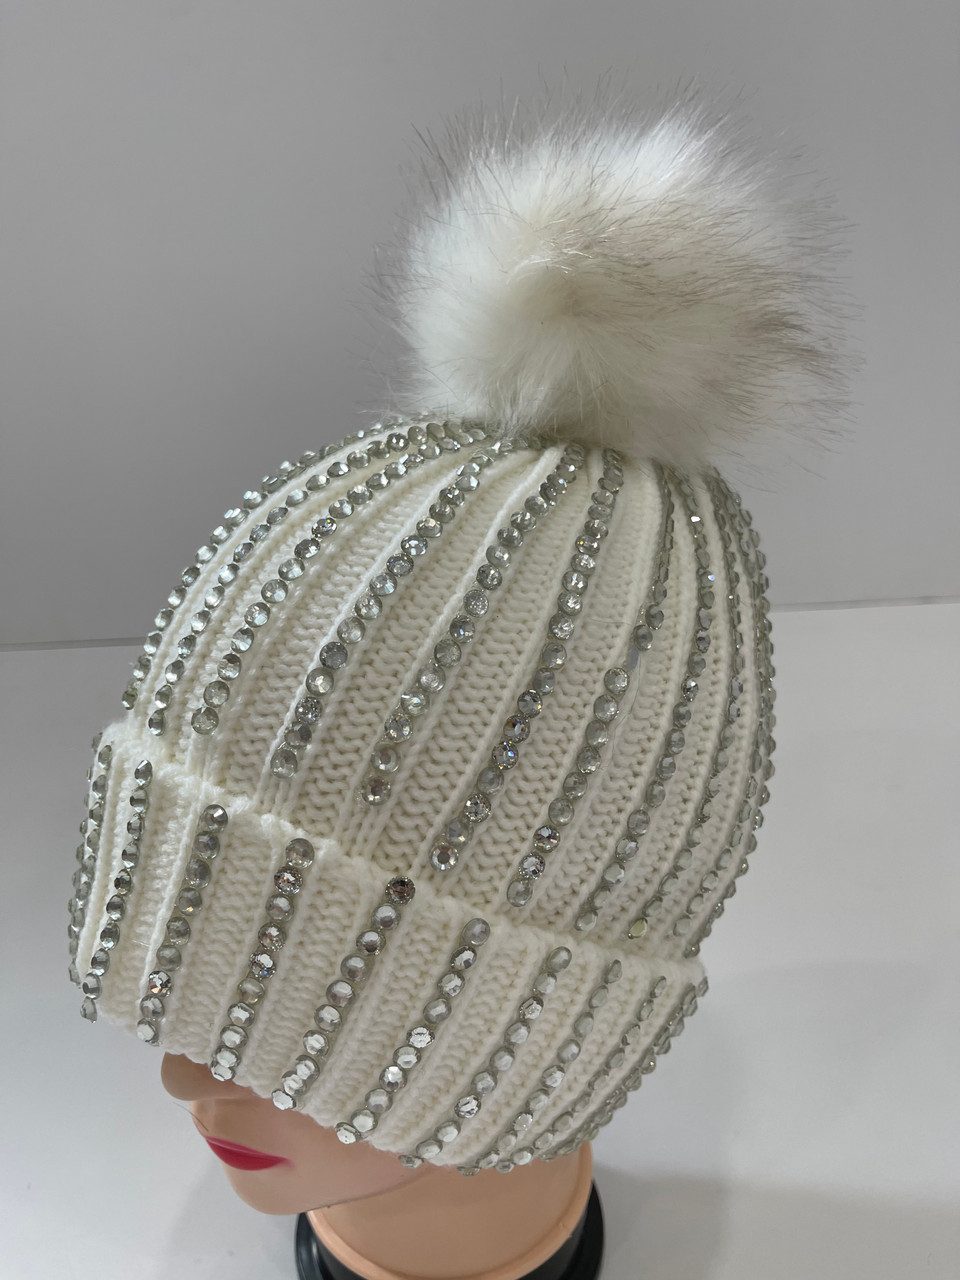 SALE! Knit Cable Rhinestone Beanie with Faux Fur Ball Assorted